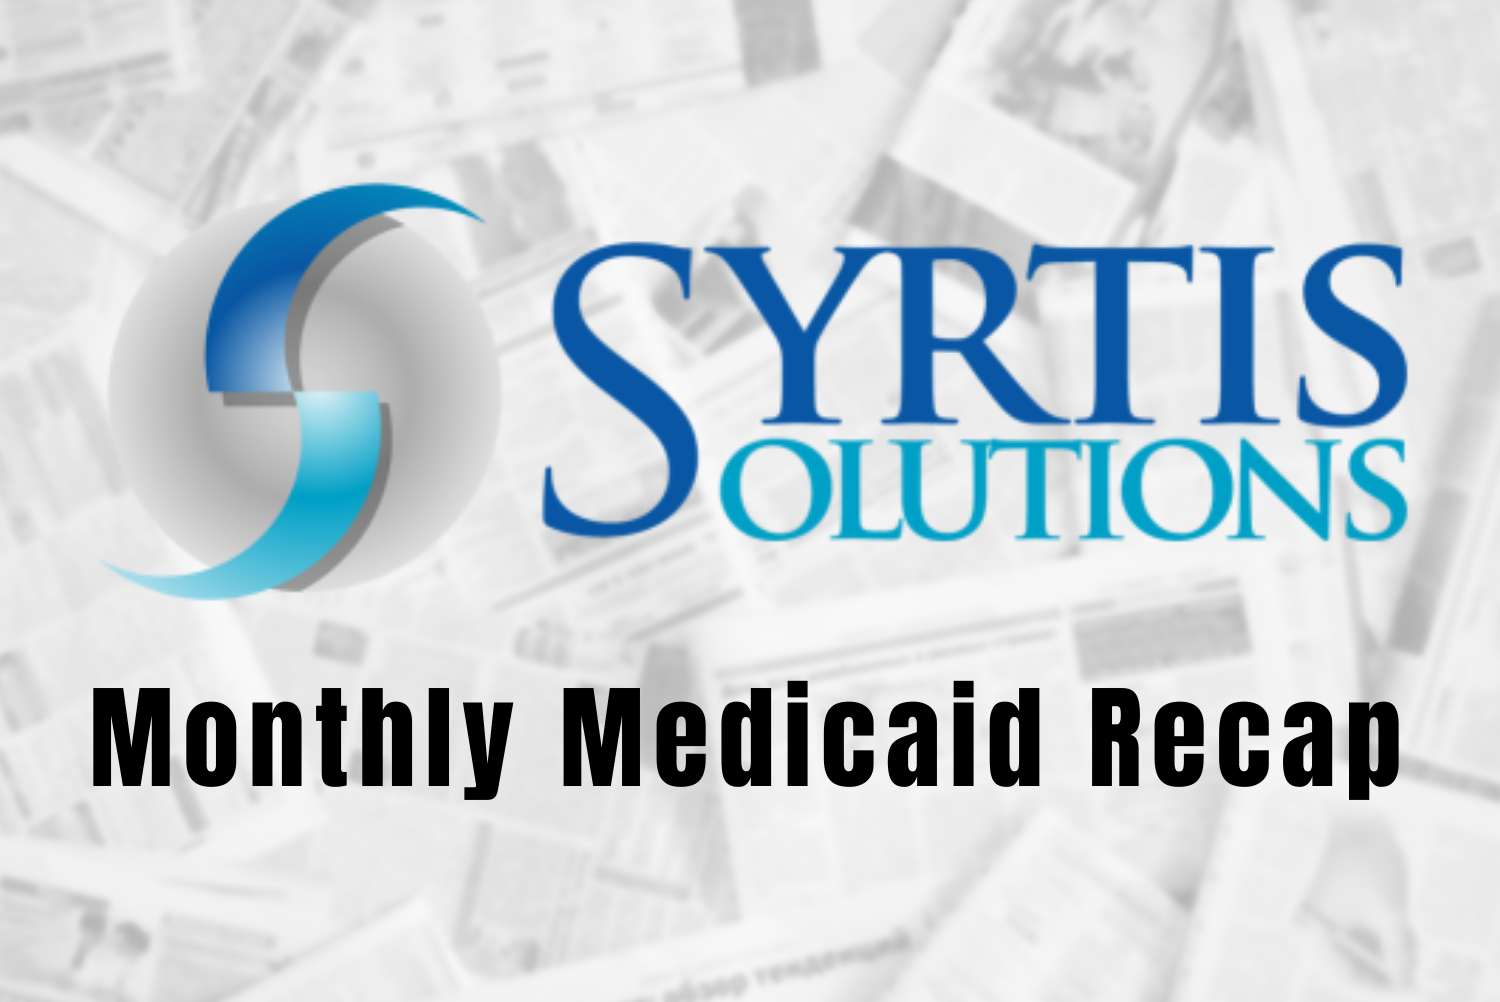 SYRTIS SOLUTIONS MONTHLY MEDICAID NEWS RECAP